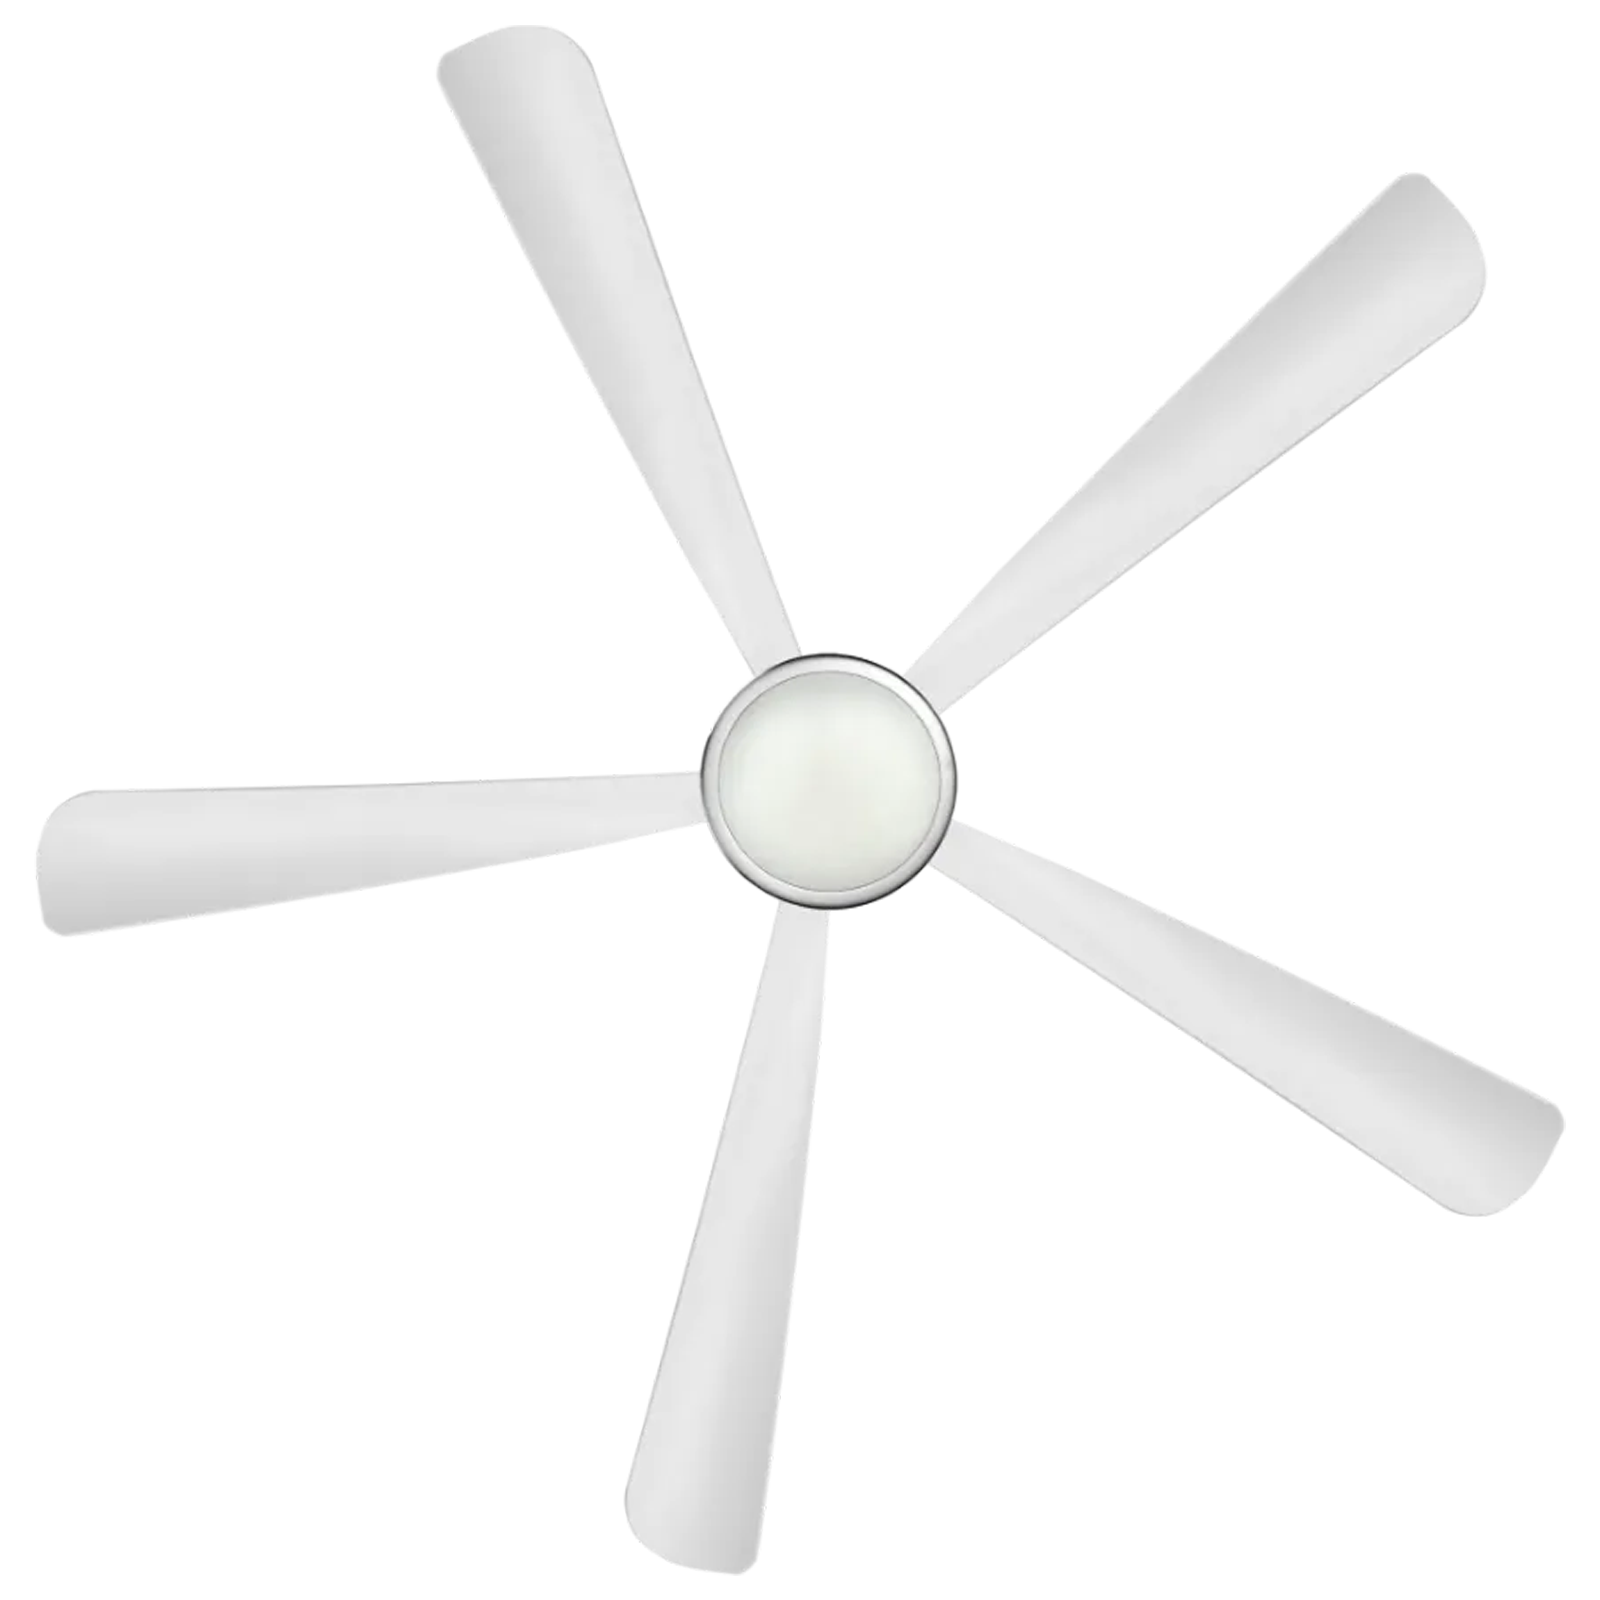 Kuhl Platin D5 150cm Sweep 5 Blade Smart Ceiling Fan (With BLDC Motor, 19033W, White)